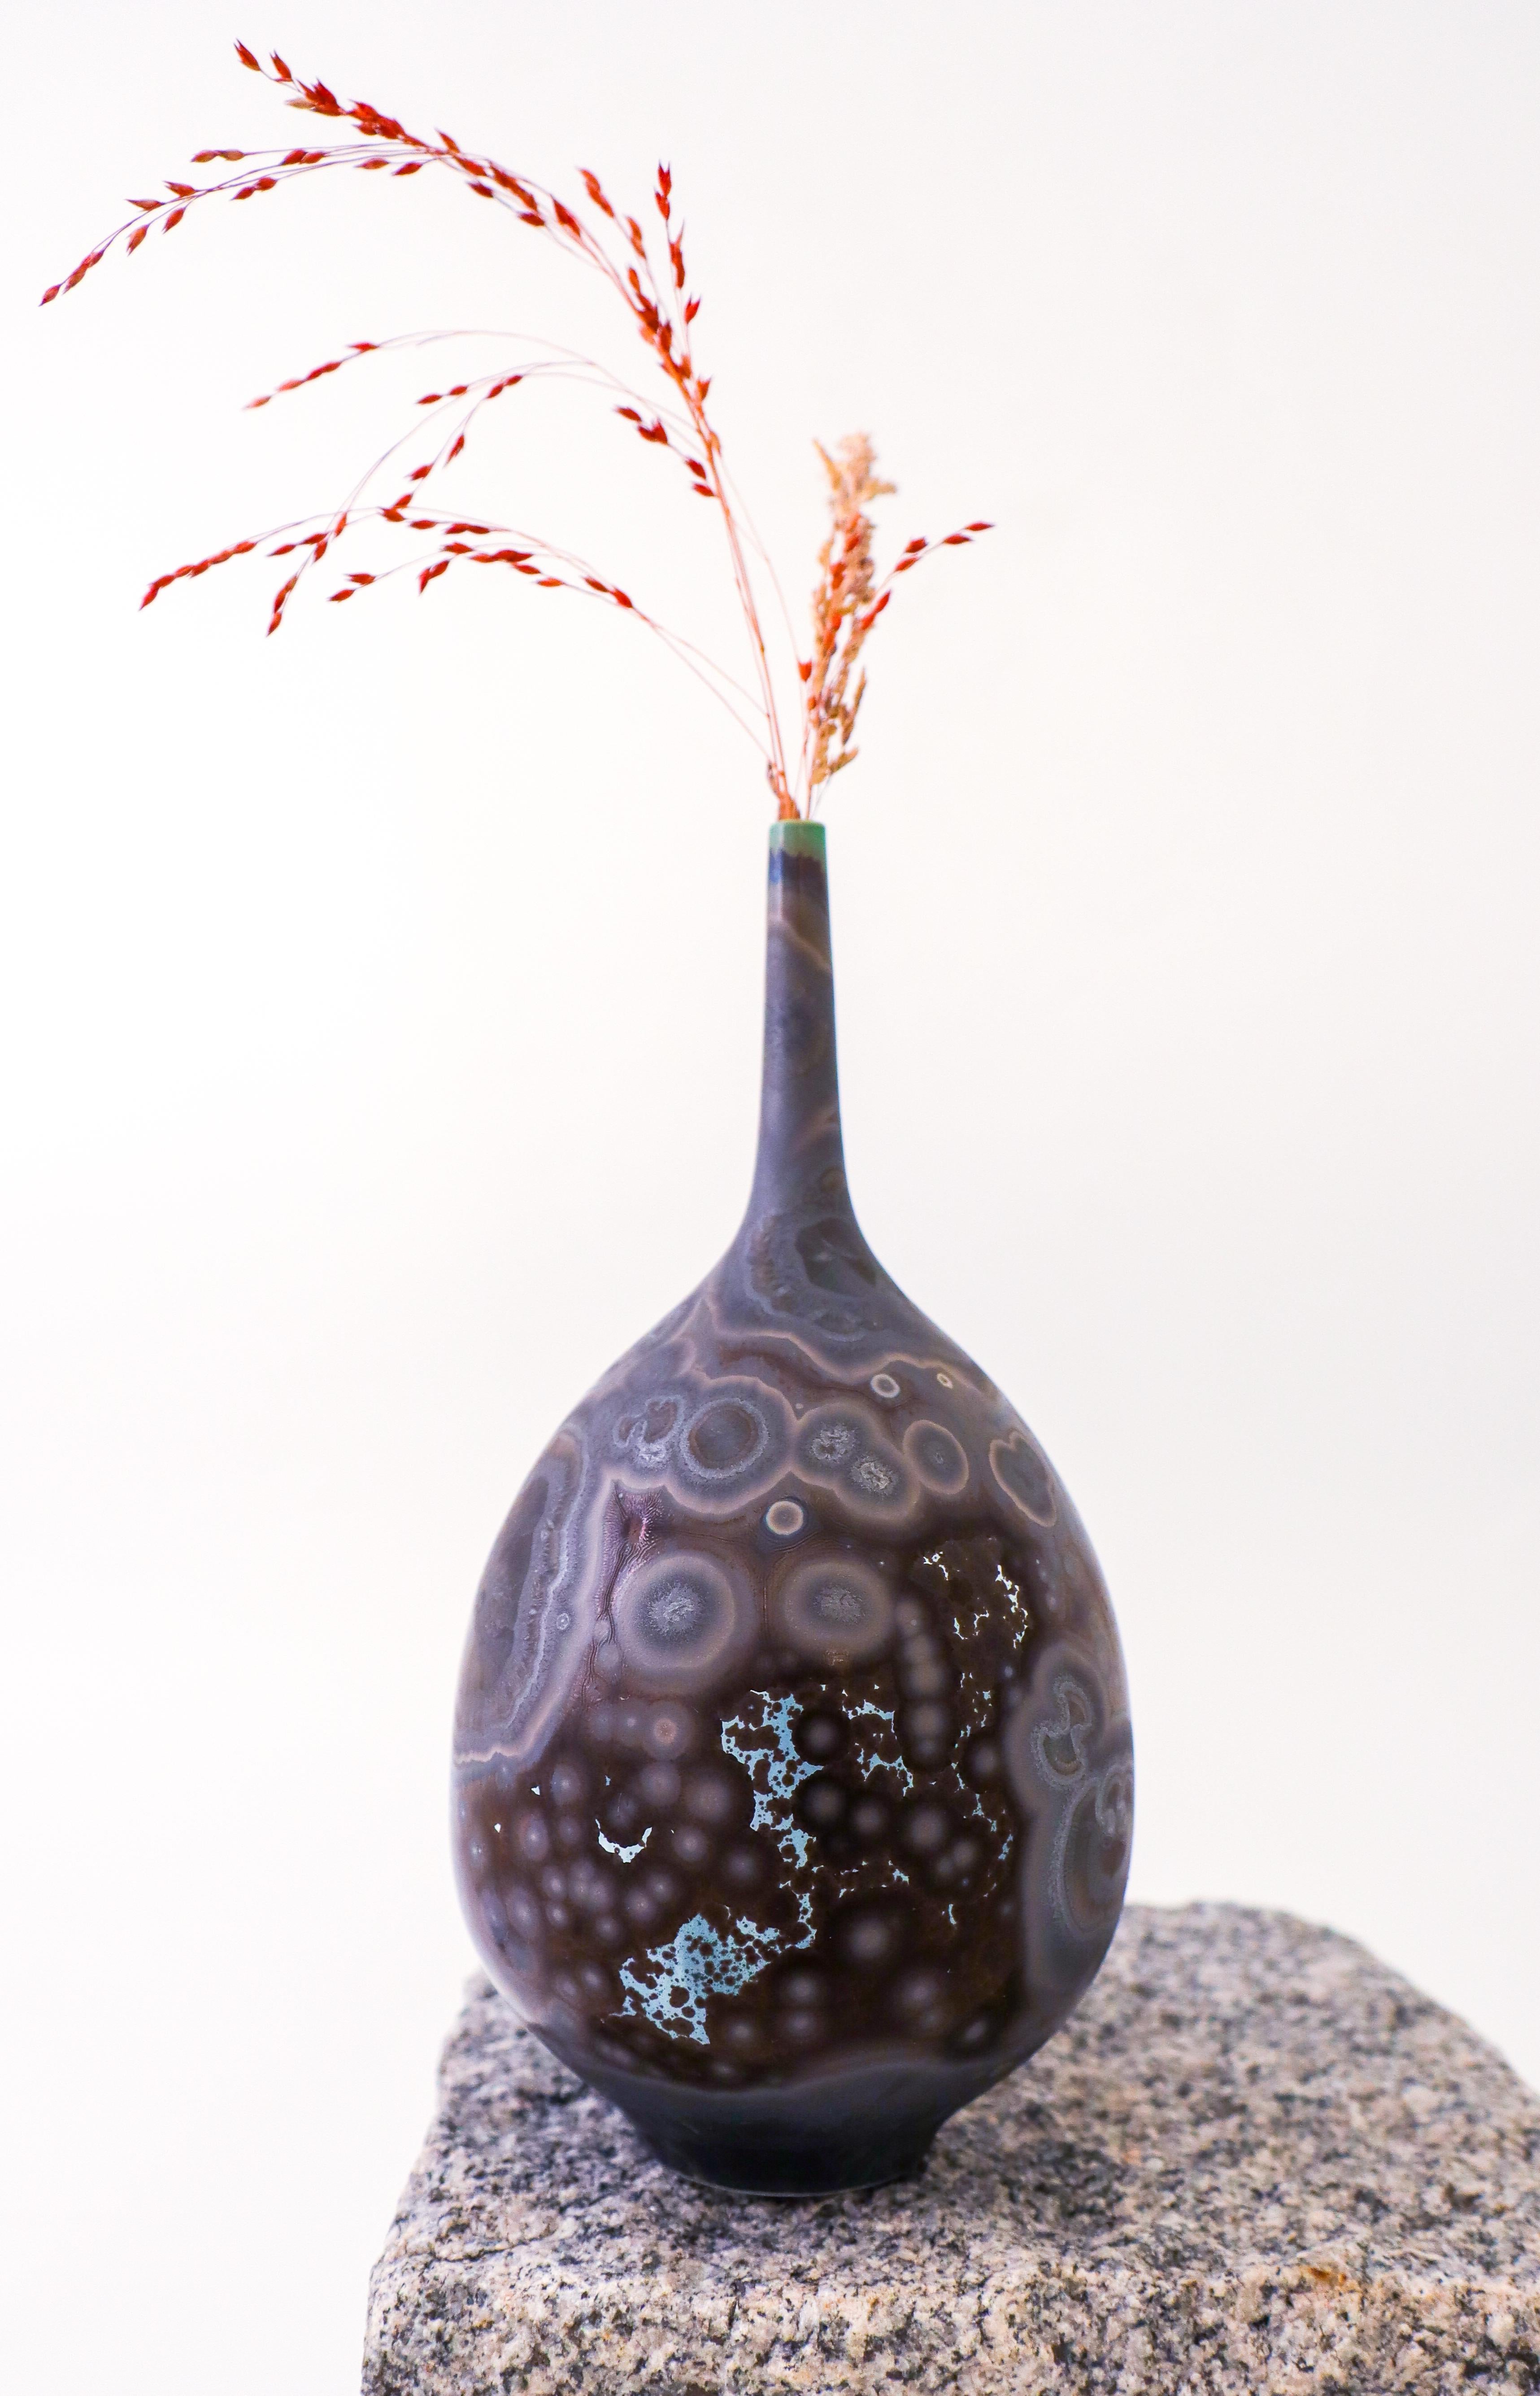 A purple & brown vase with a lovely crystalline glaze designed by Isak Isaksson in Sweden. The vase is 18.5 cm (7.4